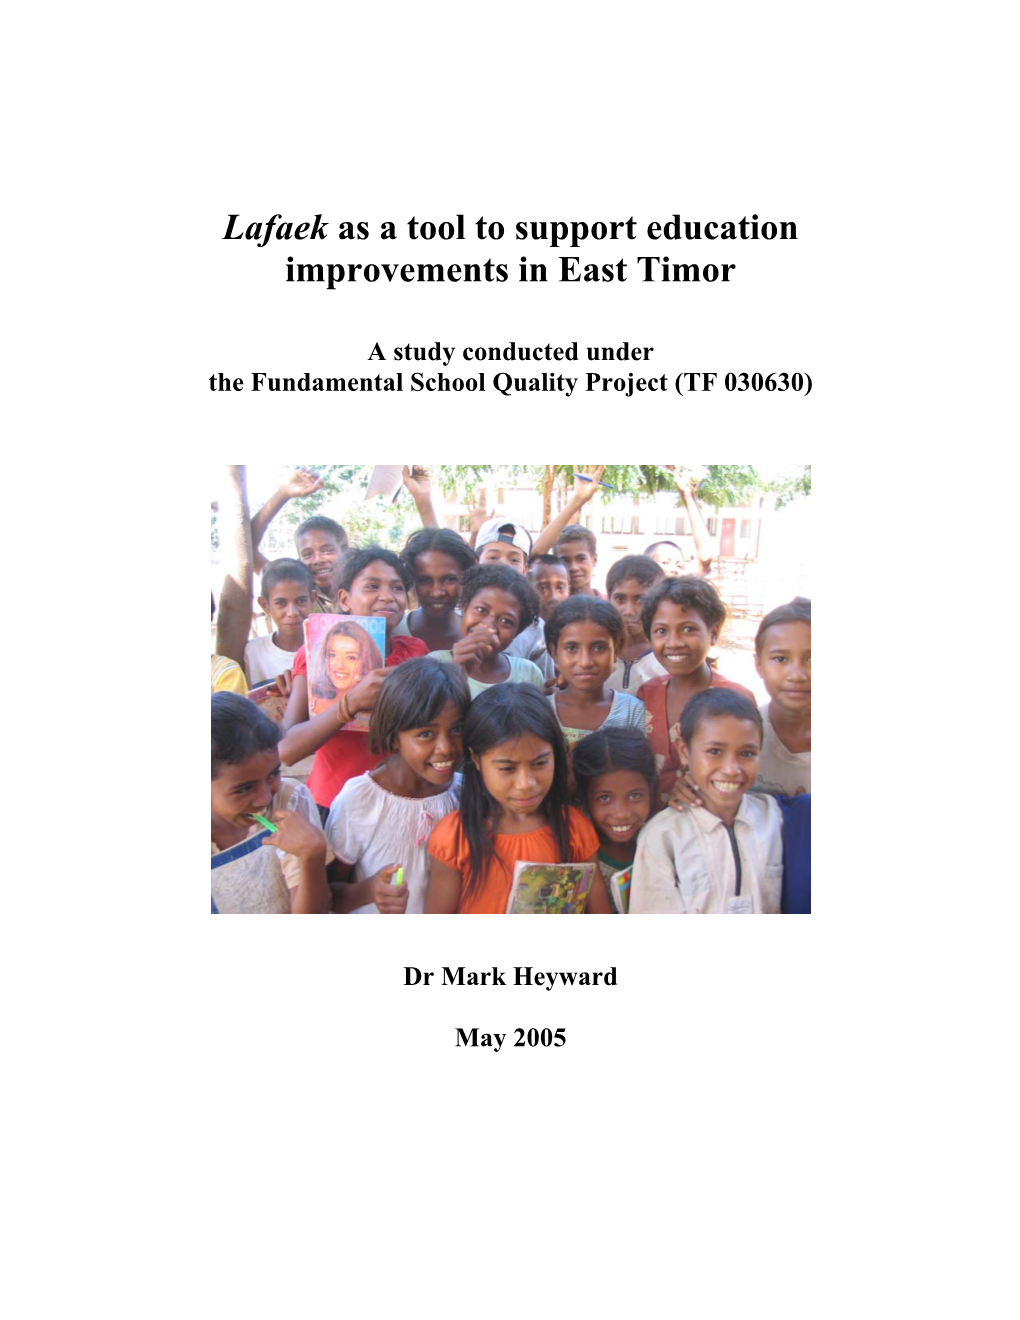 Lafaek As a Tool to Support Education Improvements in East Timor